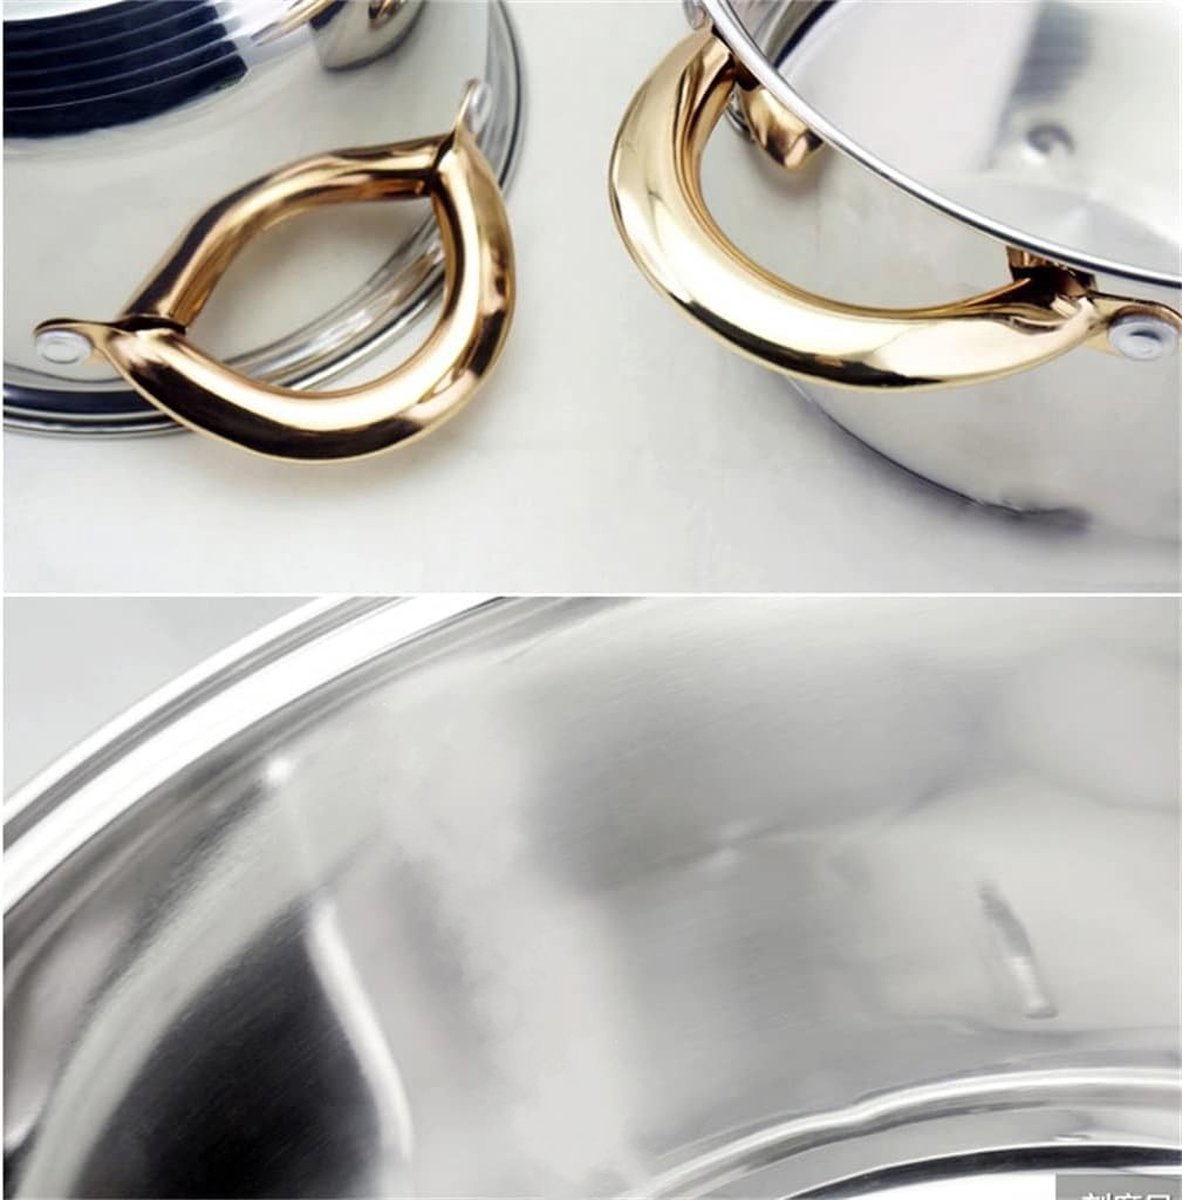 Buy wholesale Classic stainless steel pot 2 handles 20 cm, height 14.5 cm